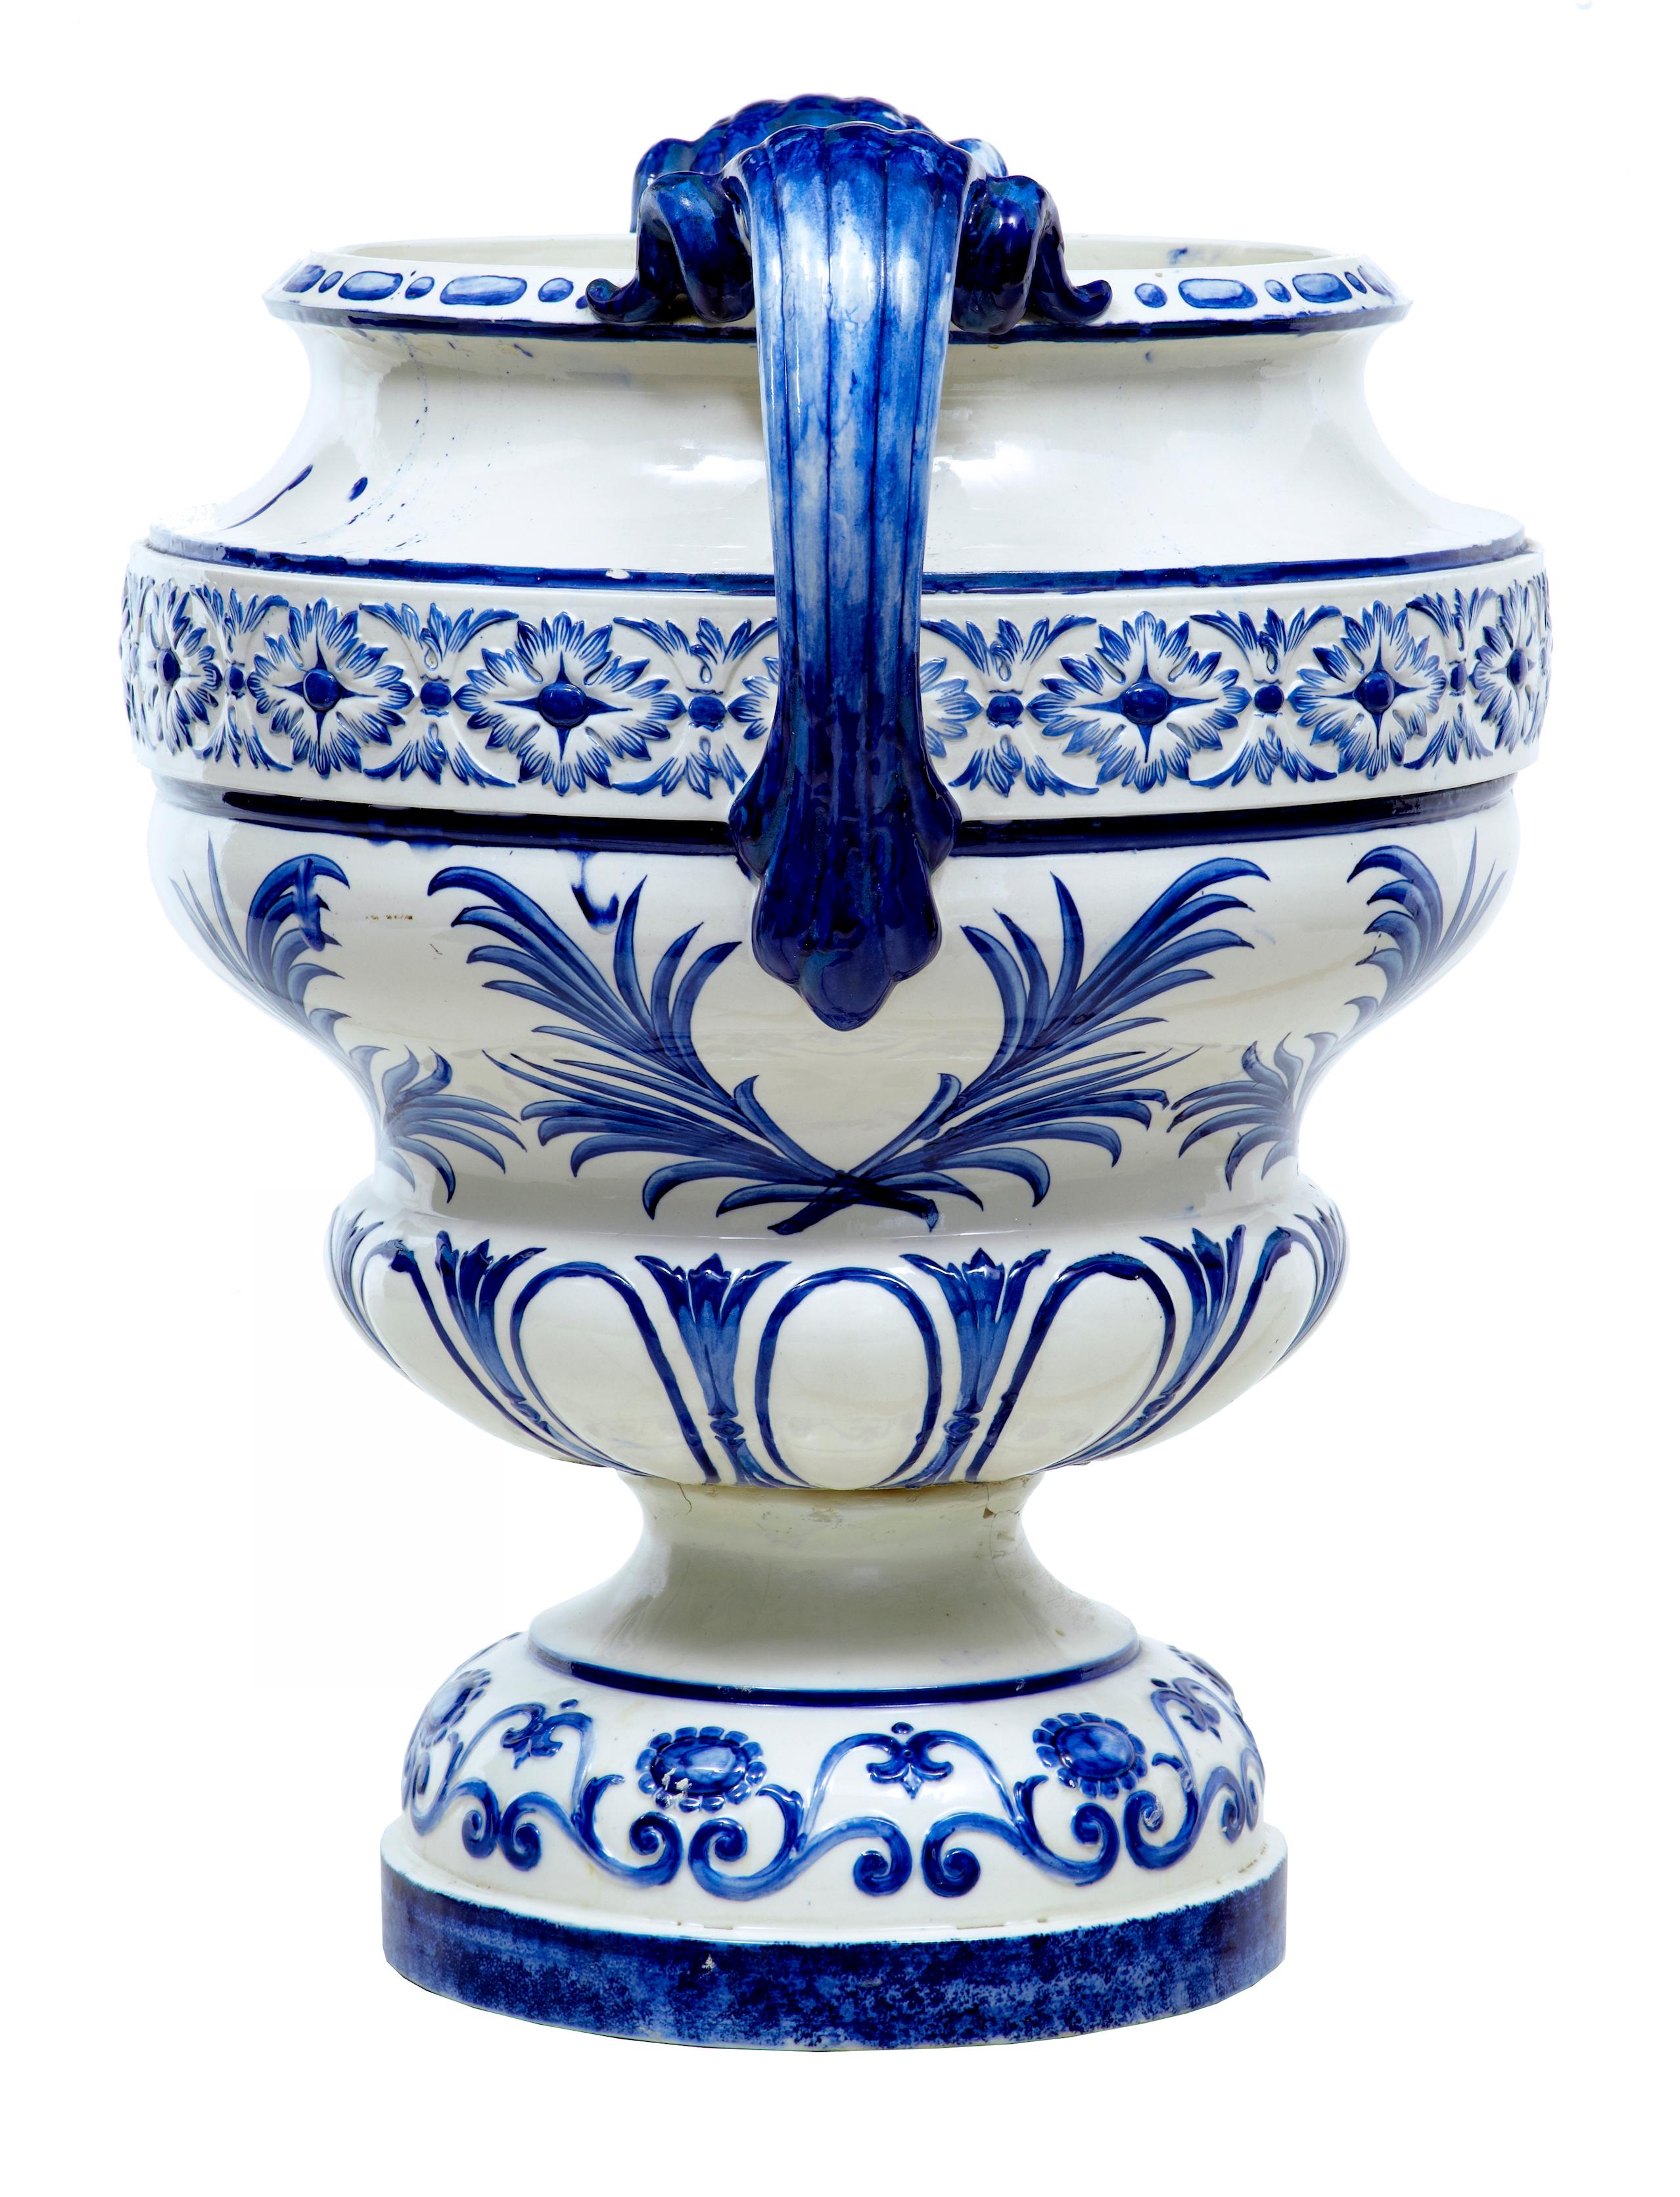 Early 20th century Swedish ceramic urn by Rorstrand, circa 1901.

Large blue and white urn by the reknowned maker Rorstrand stamped 1901. Rorstrand are a Swedish company that have been making fine quality porcelain and pottery since 1726 and still